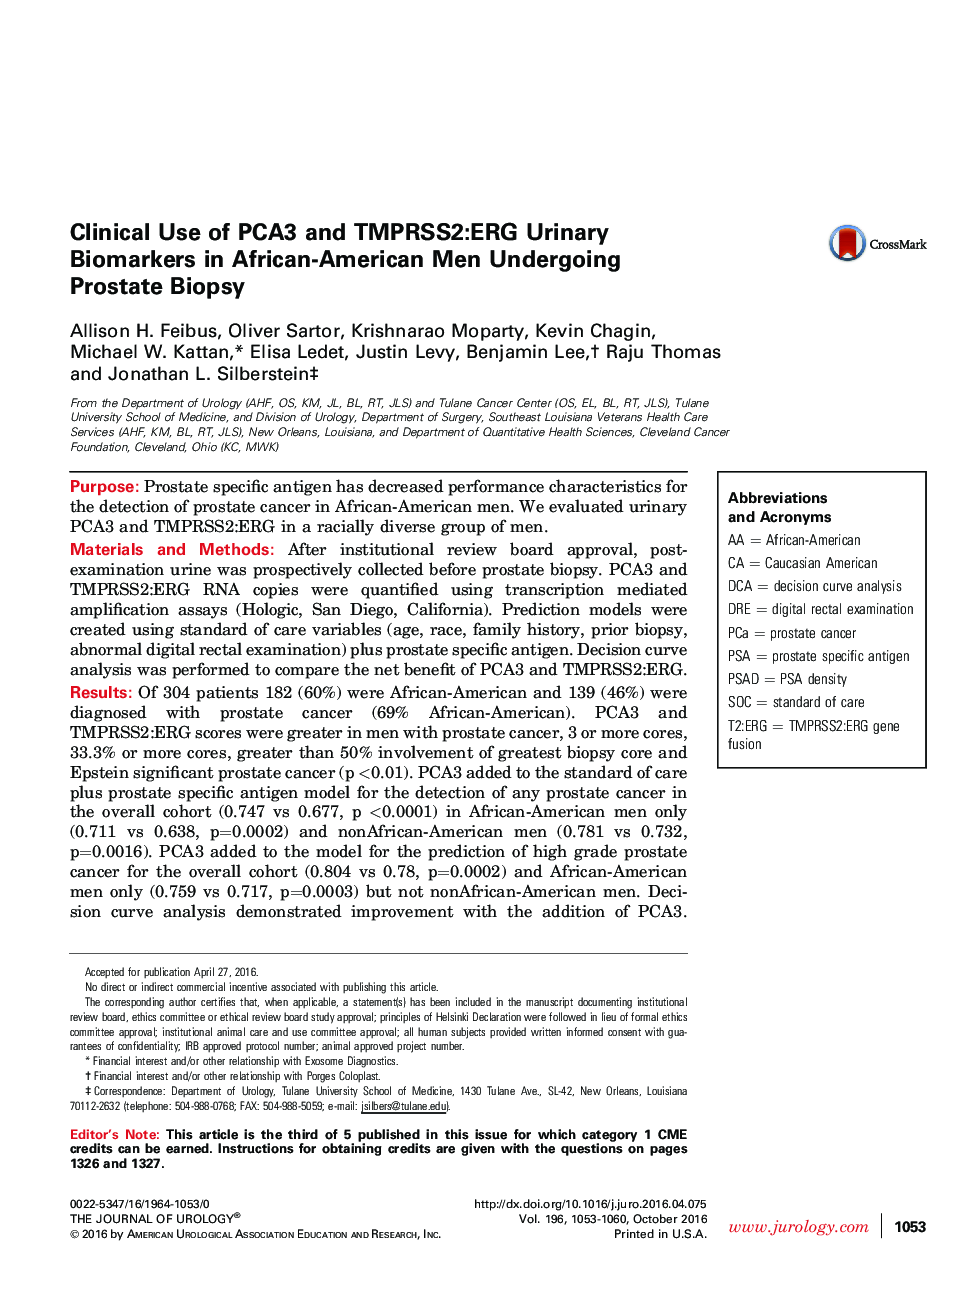 Clinical Use of PCA3 and TMPRSS2:ERG Urinary Biomarkers in African-American Men Undergoing Prostate Biopsy 